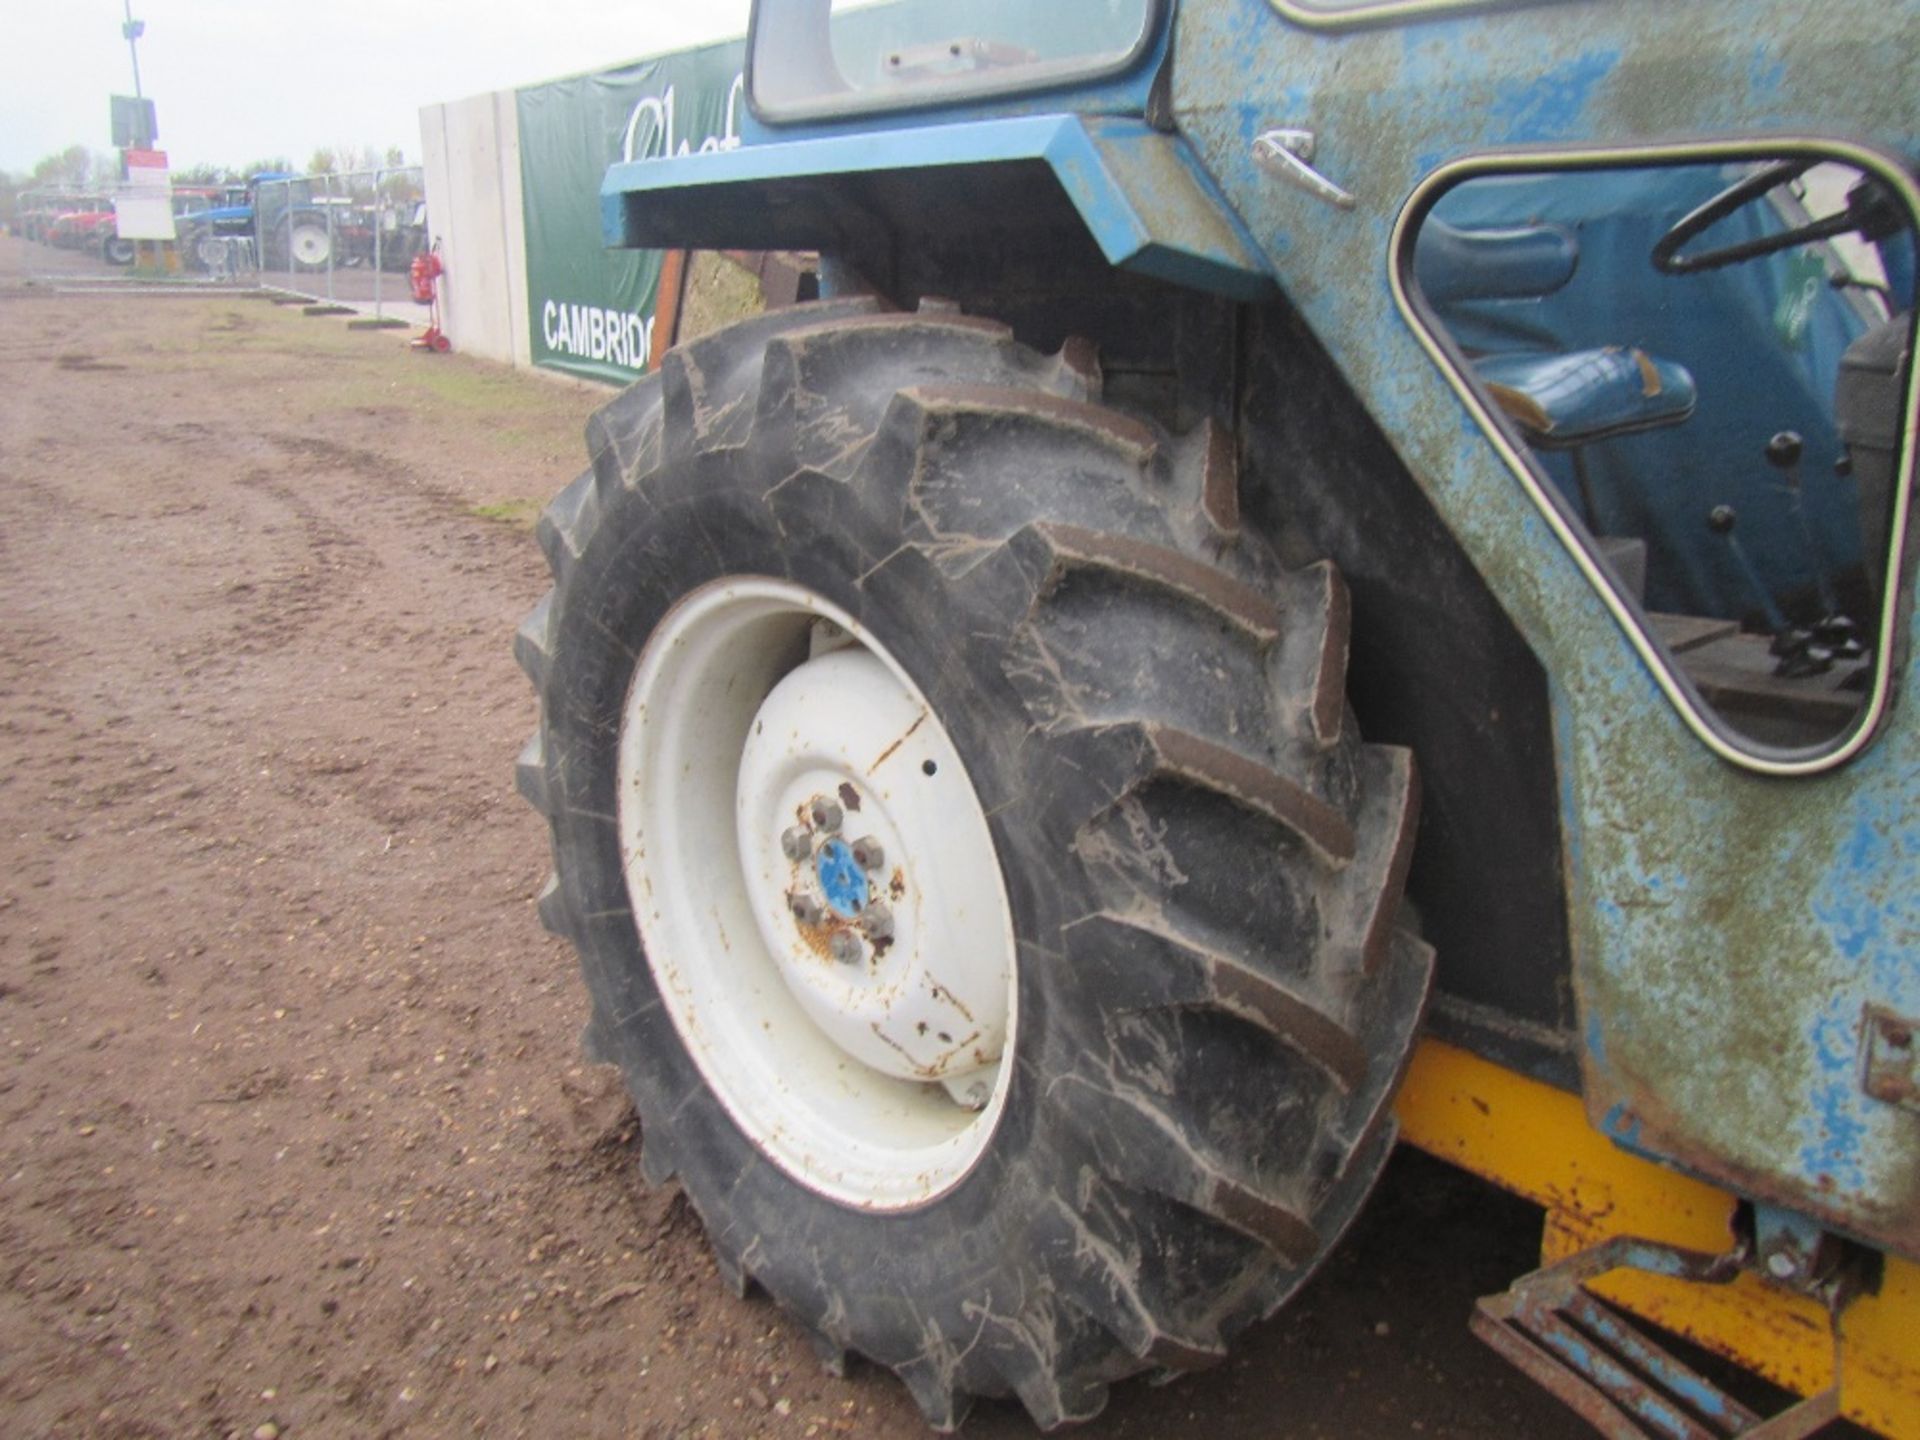 1979 Ford 4600 Tractor. Loader, Power Steering, Bucket, 14.9R28 Tyres. 2887 hrs. Ser No B999392 - Image 6 of 18